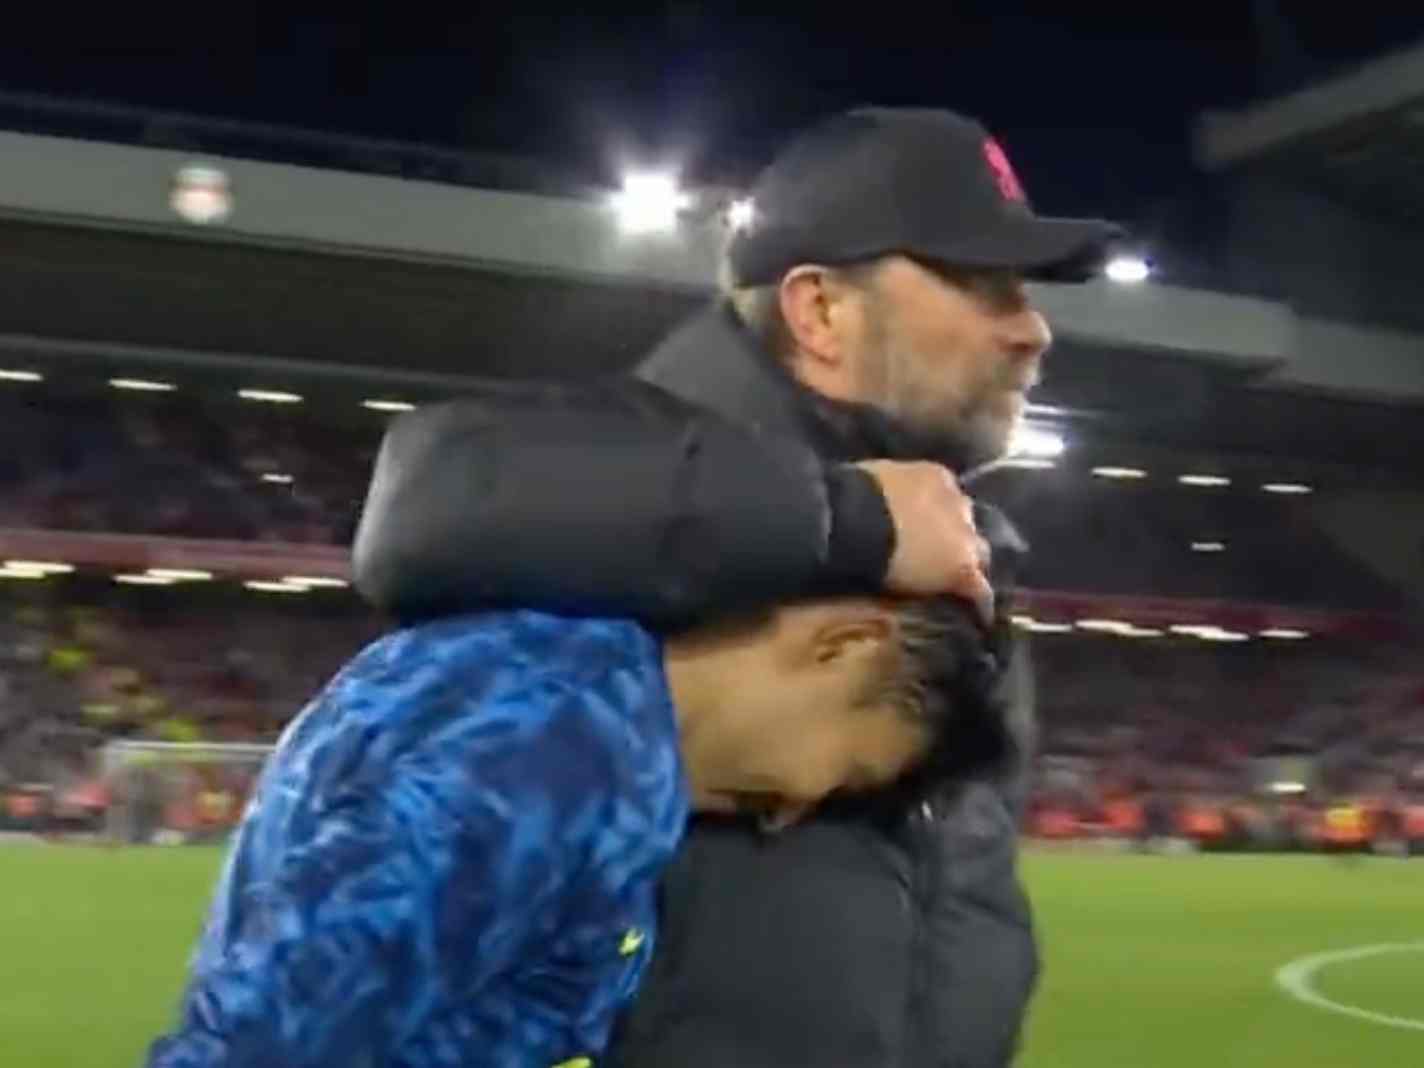 The photo shows Jurgen Klopp hugging Son Heung-min at full-time after the 1-1 draw between Liverpool and Tottenham Hotspur at Anfield.